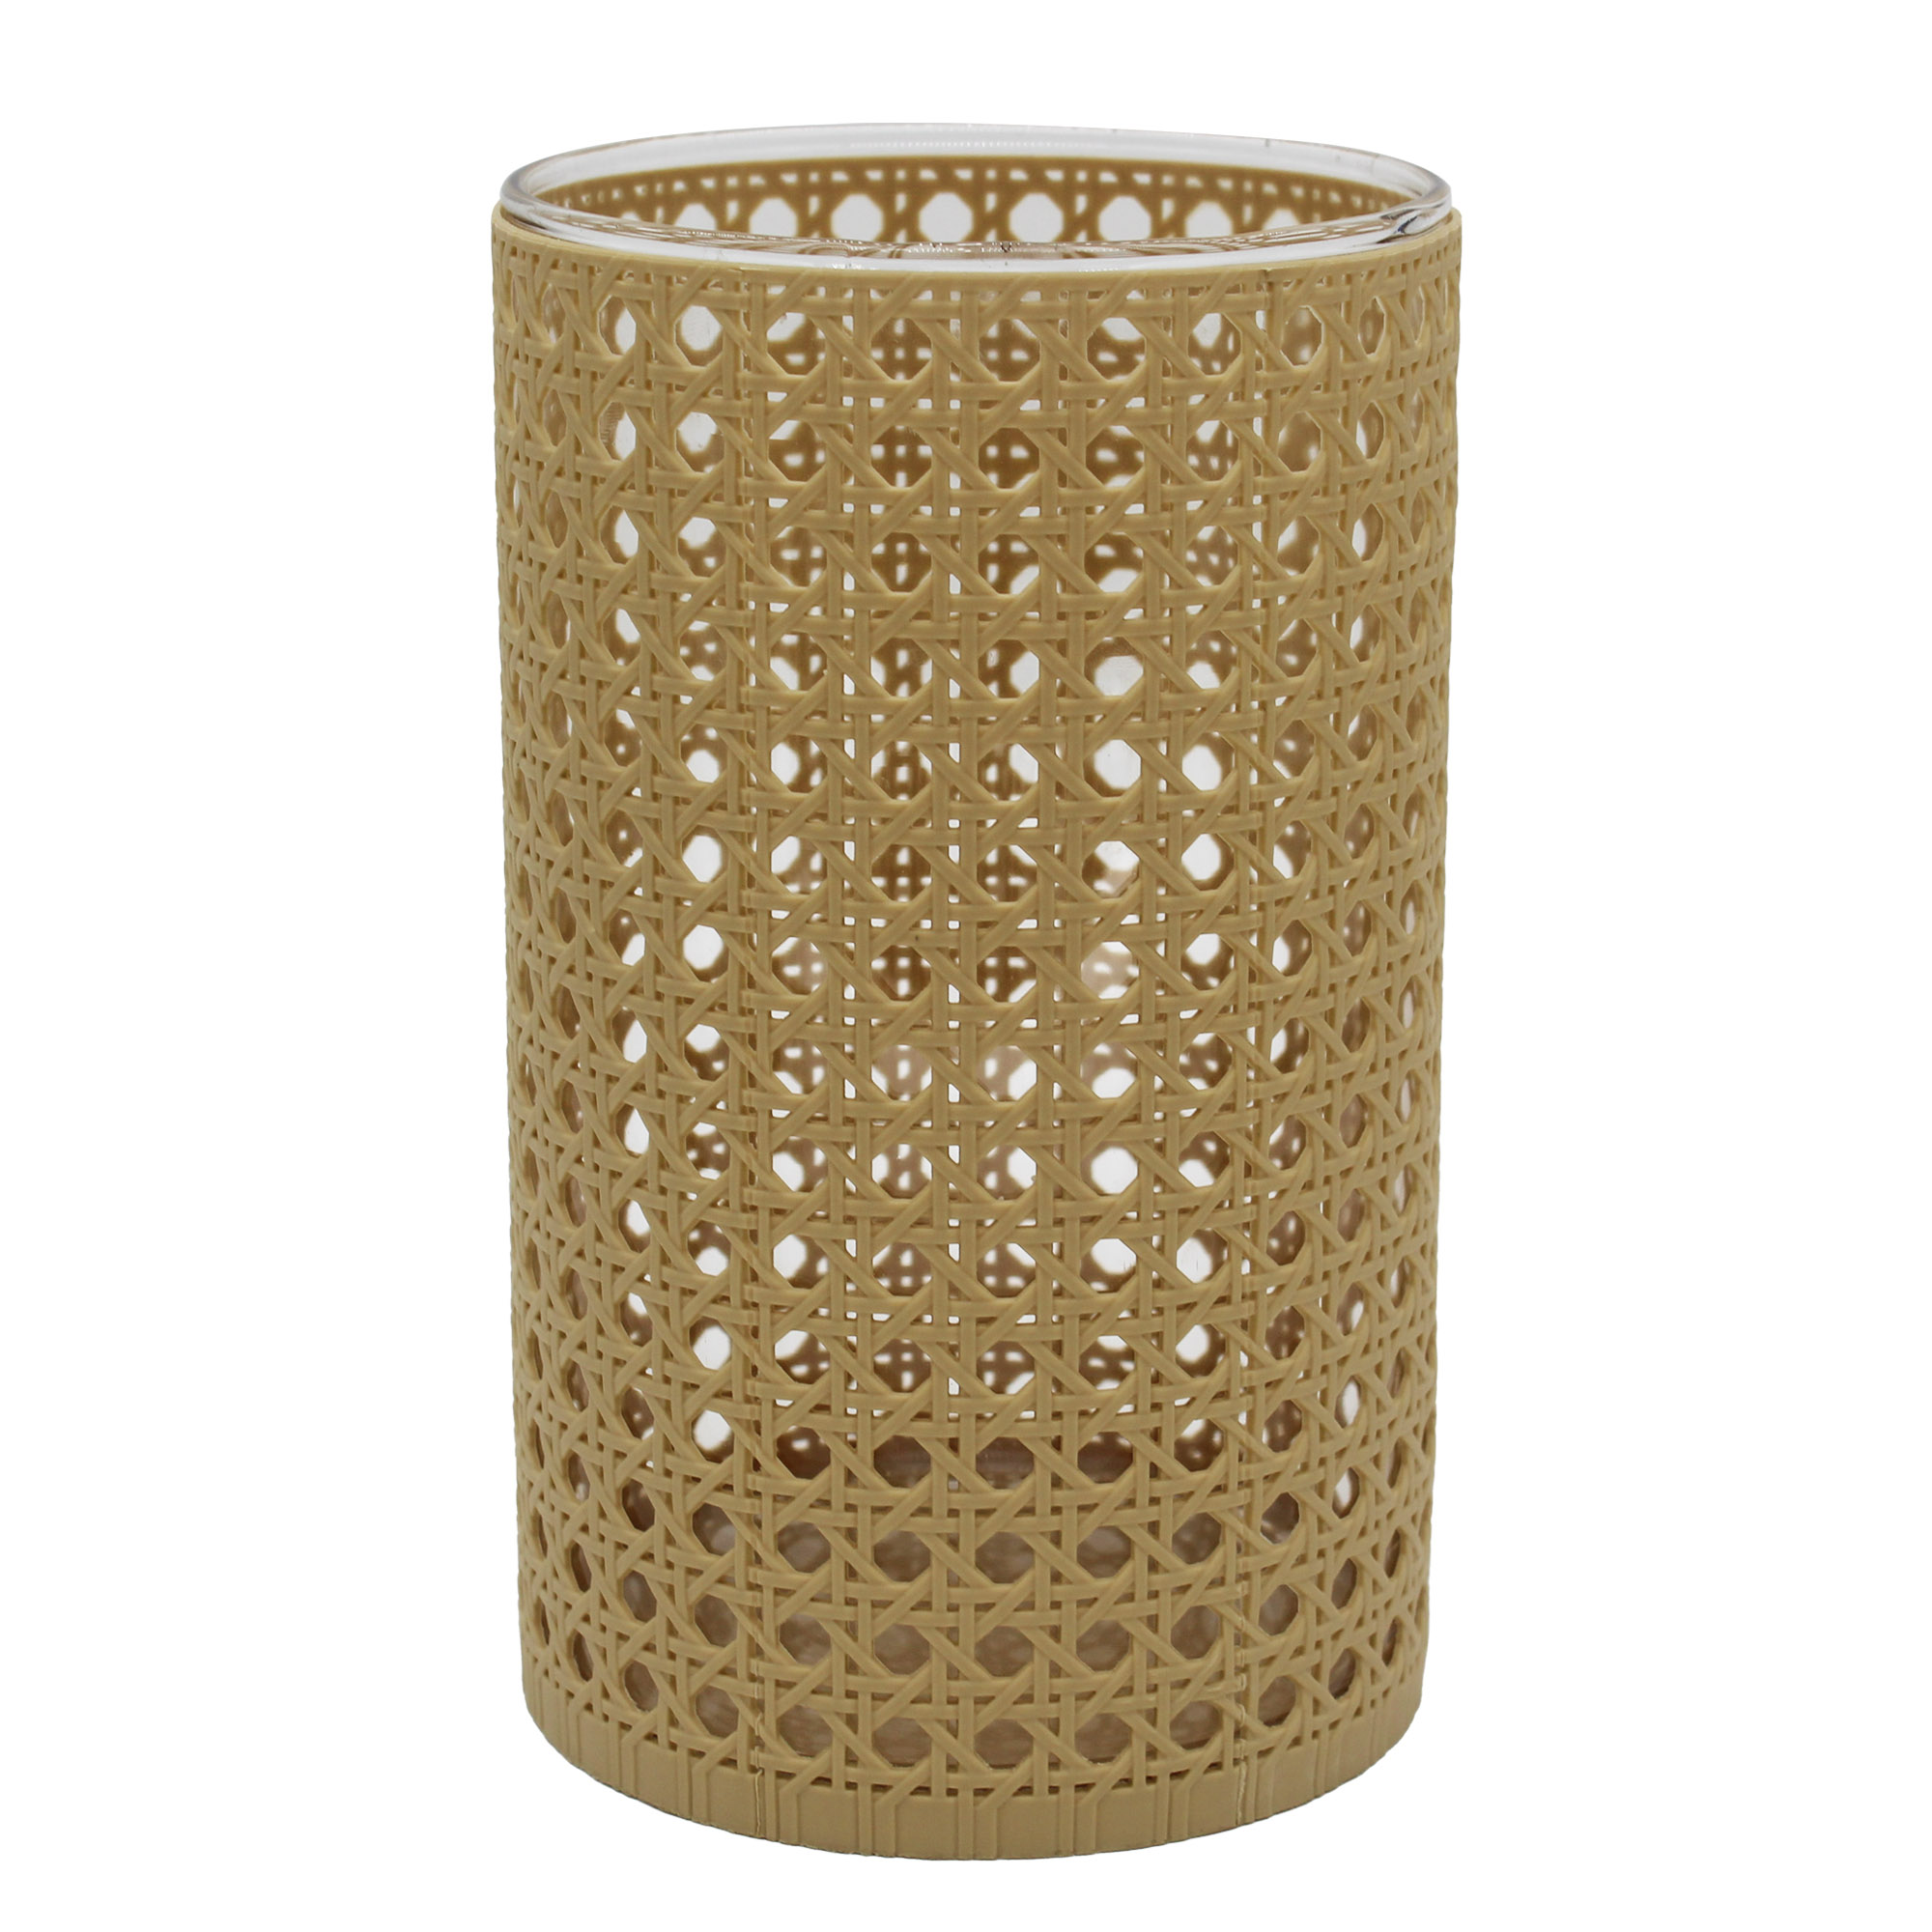 Better Homes & Gardens Glass Hurricane Candleholder Wrapped in Brown Woven Thermoplastic Rubber, Size: 4.75 x 4.75 x 7.875 H(IN)